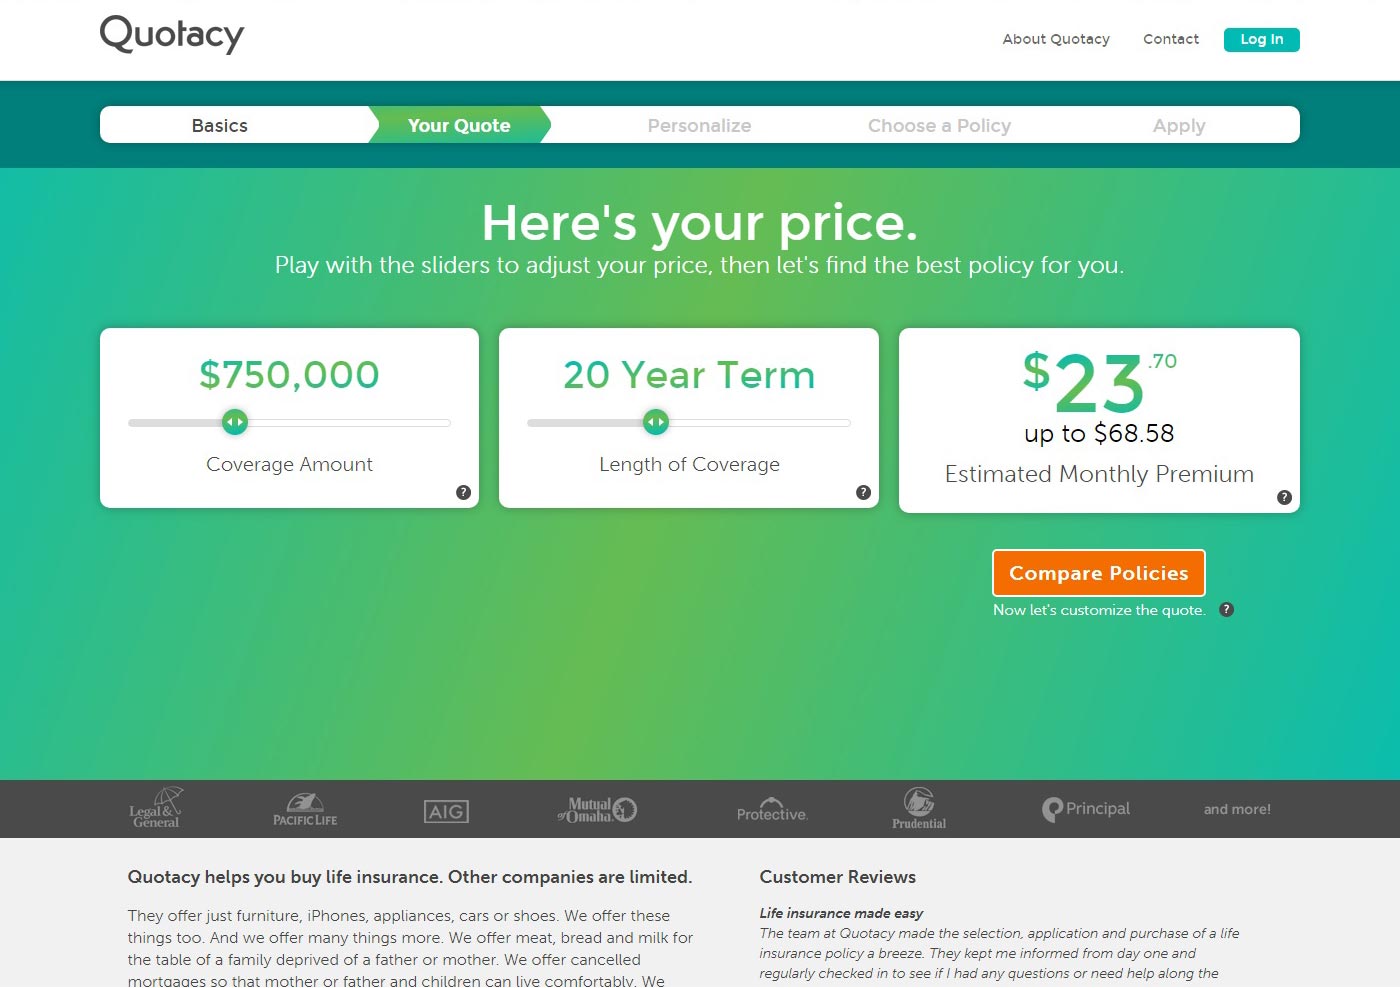 screenshot of Quotacy quoting tool showing $750,000 term life insurance policy